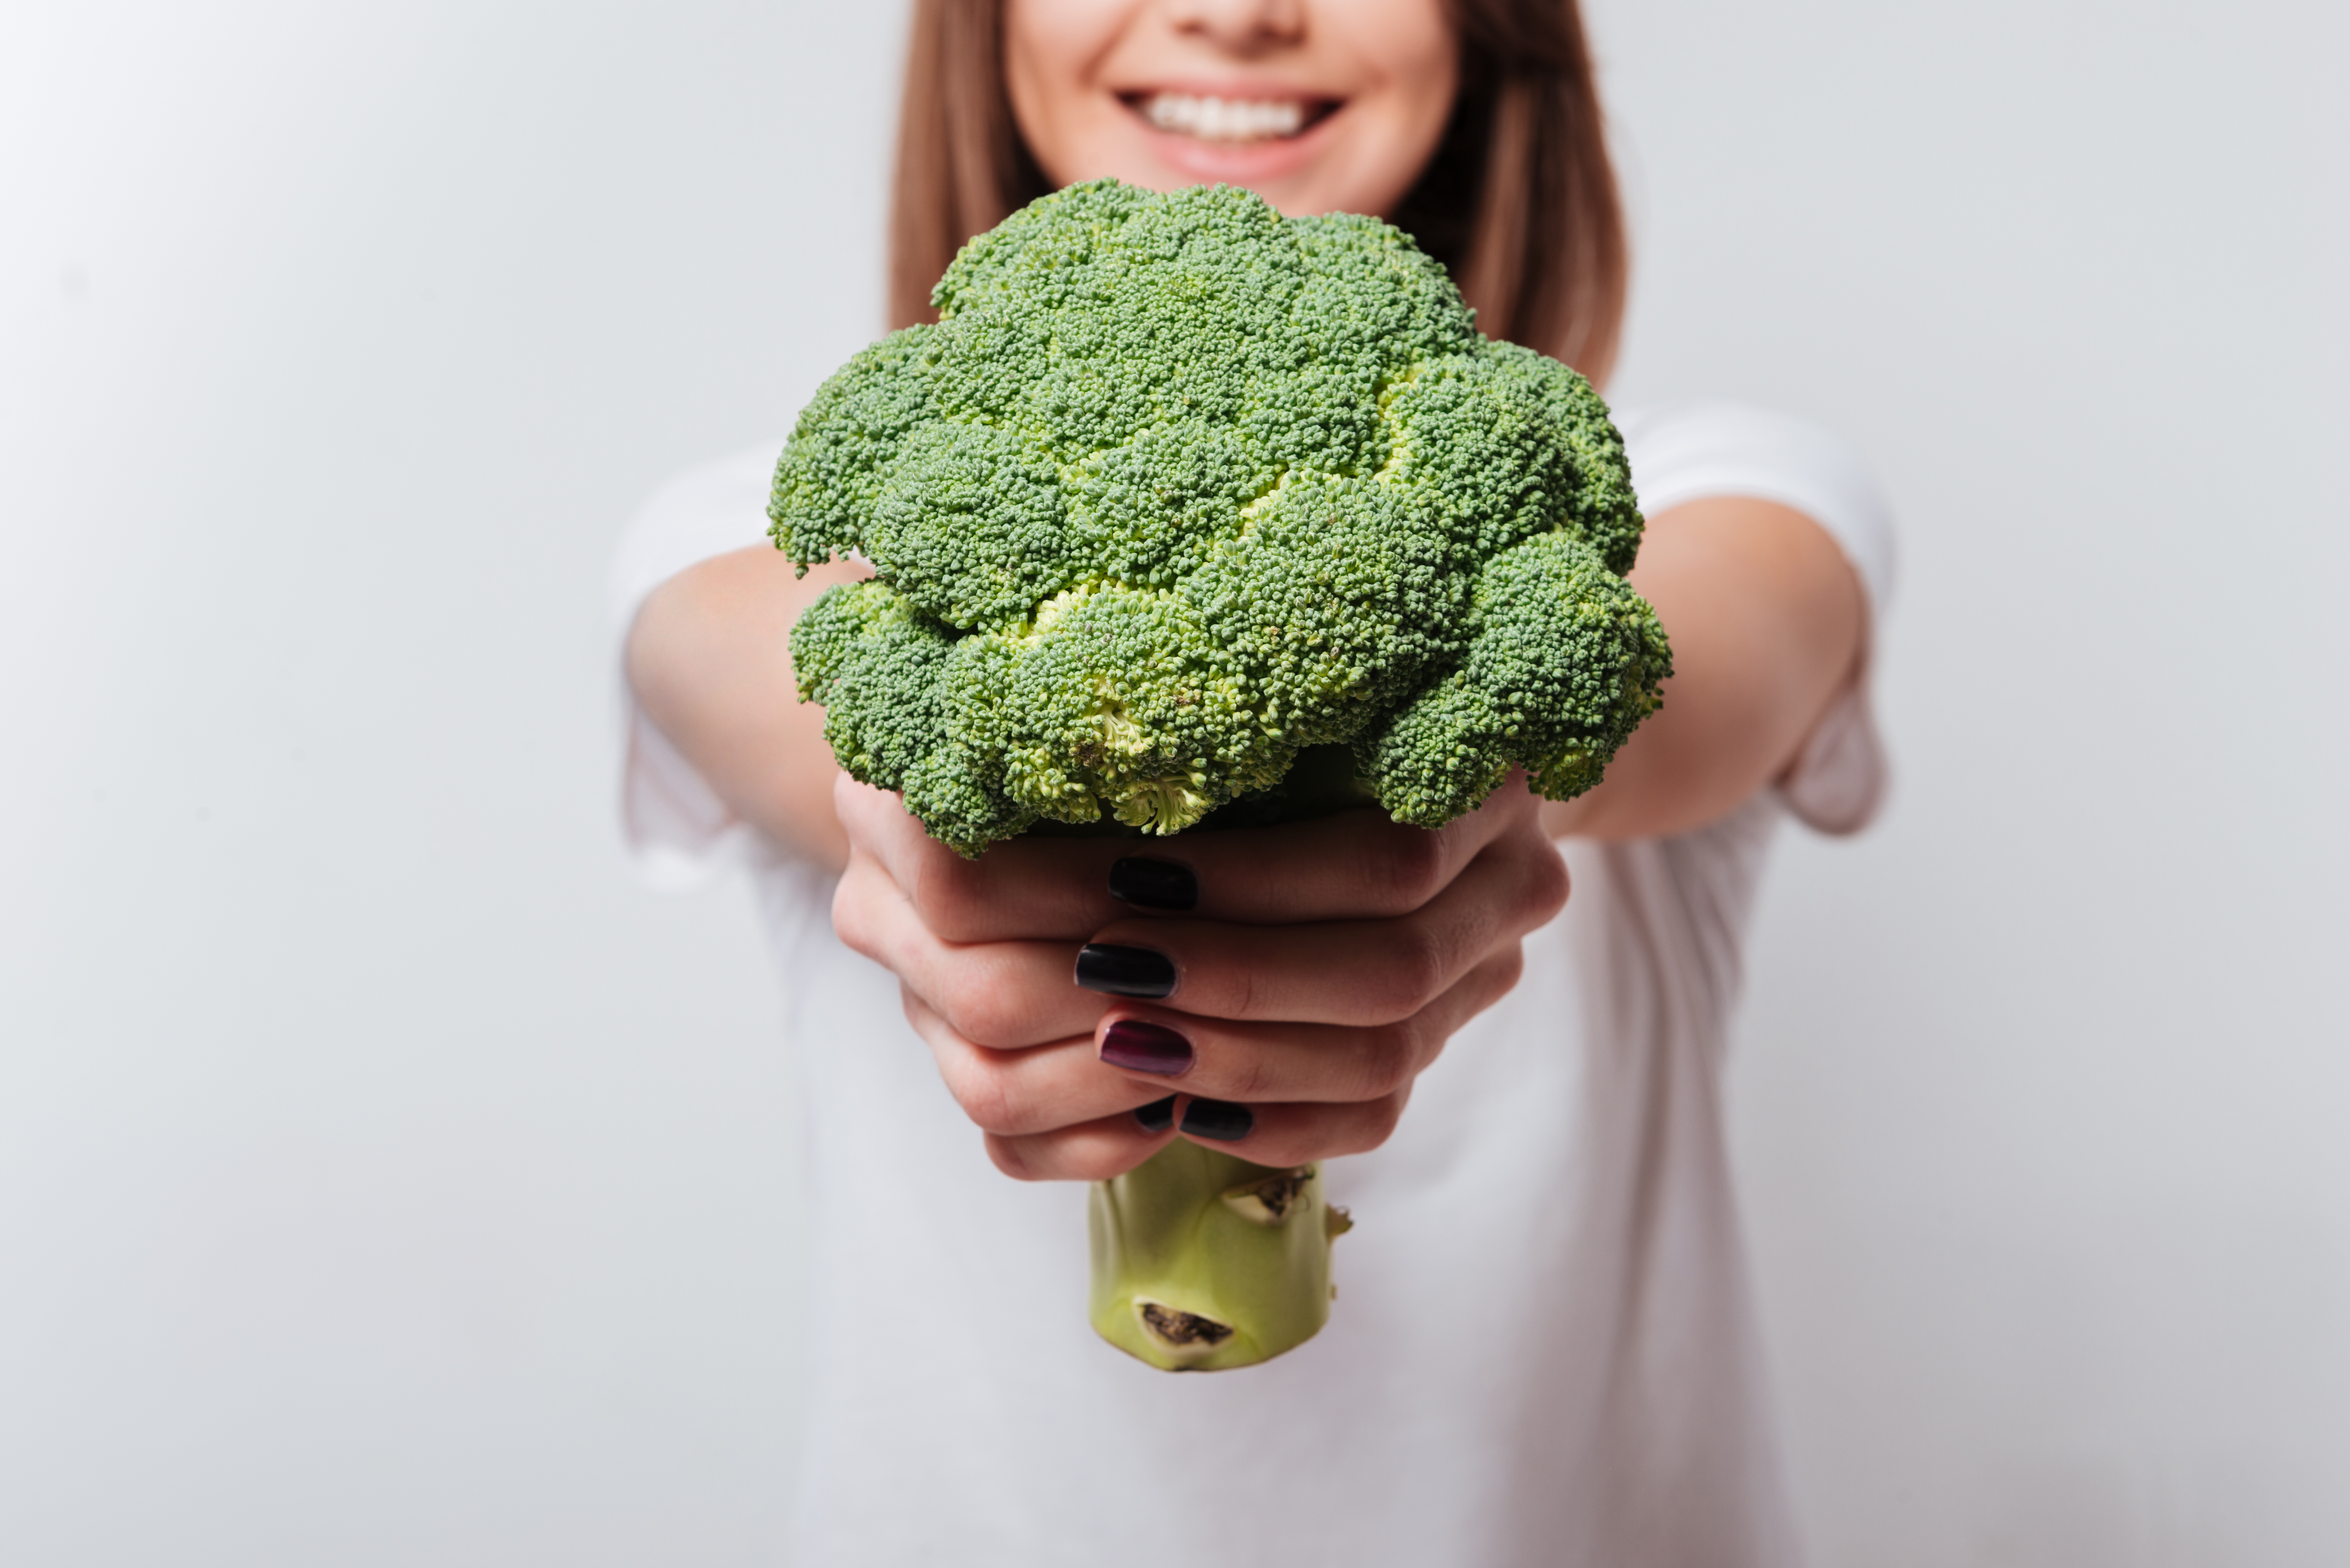 Young woman showing broccoli to camera.